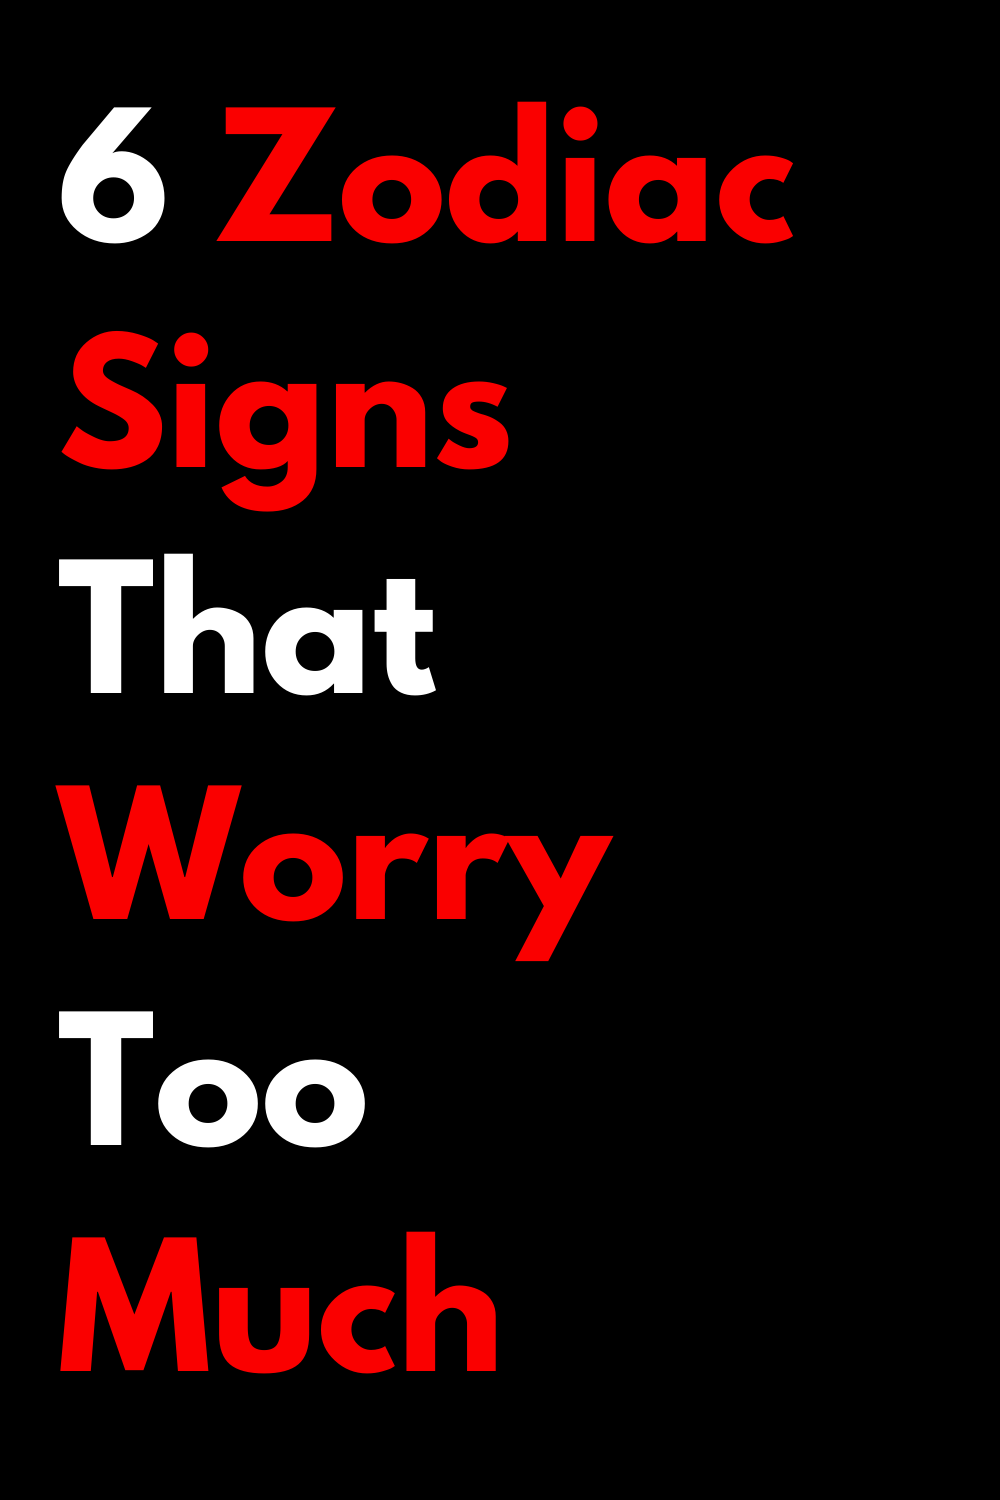 6 Zodiac Signs That Worry Too Much